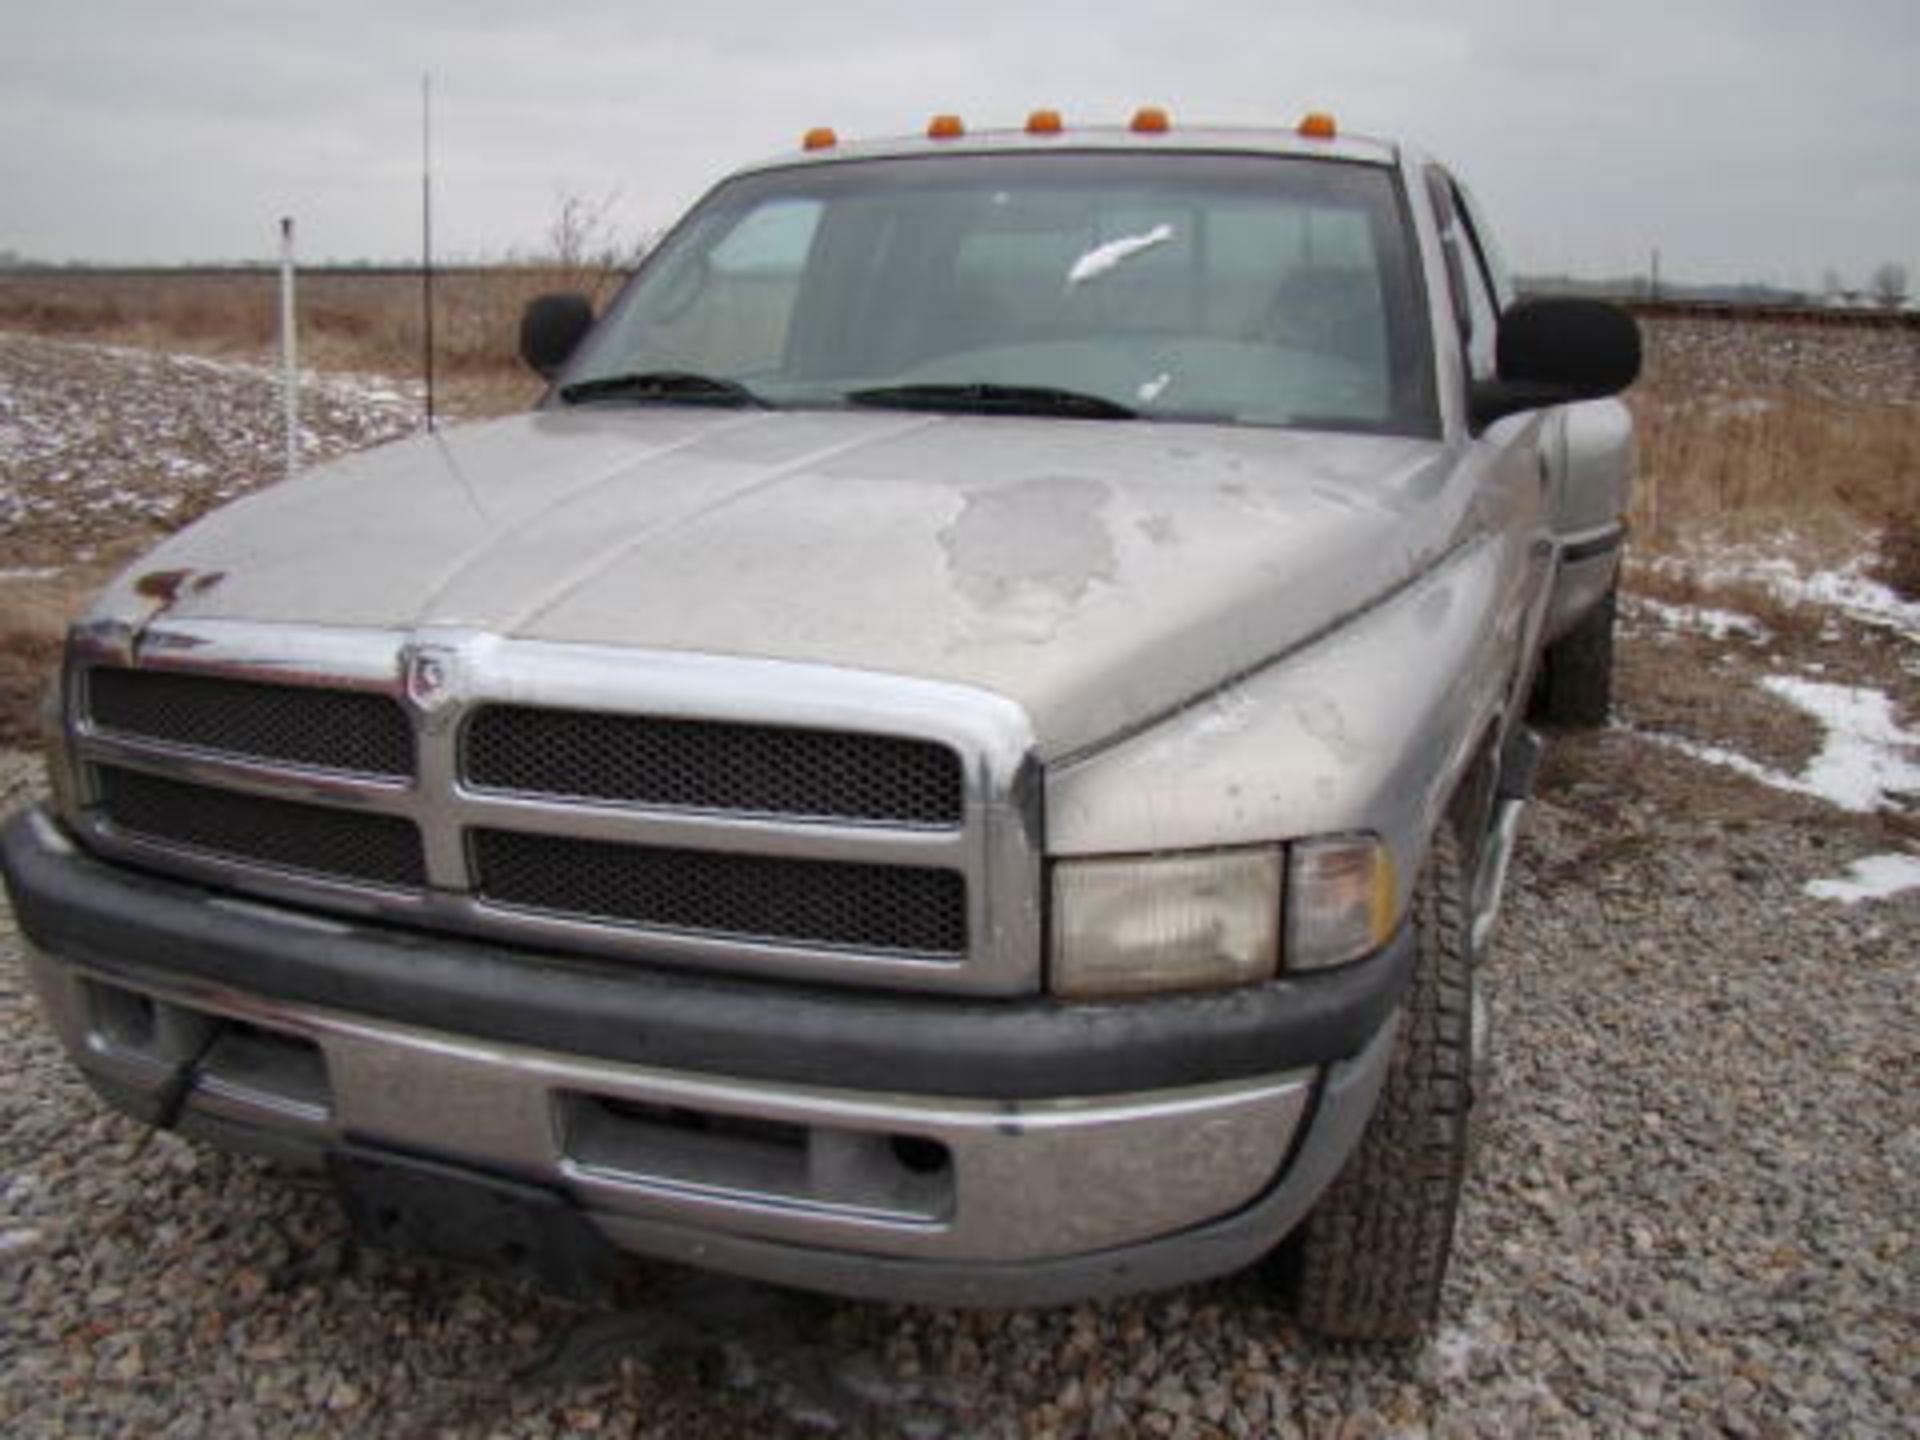 Lot 126b - (Lot 126b) Dodge Ram 3500 extended cab, diesel, dually, questionable trans missionÂ